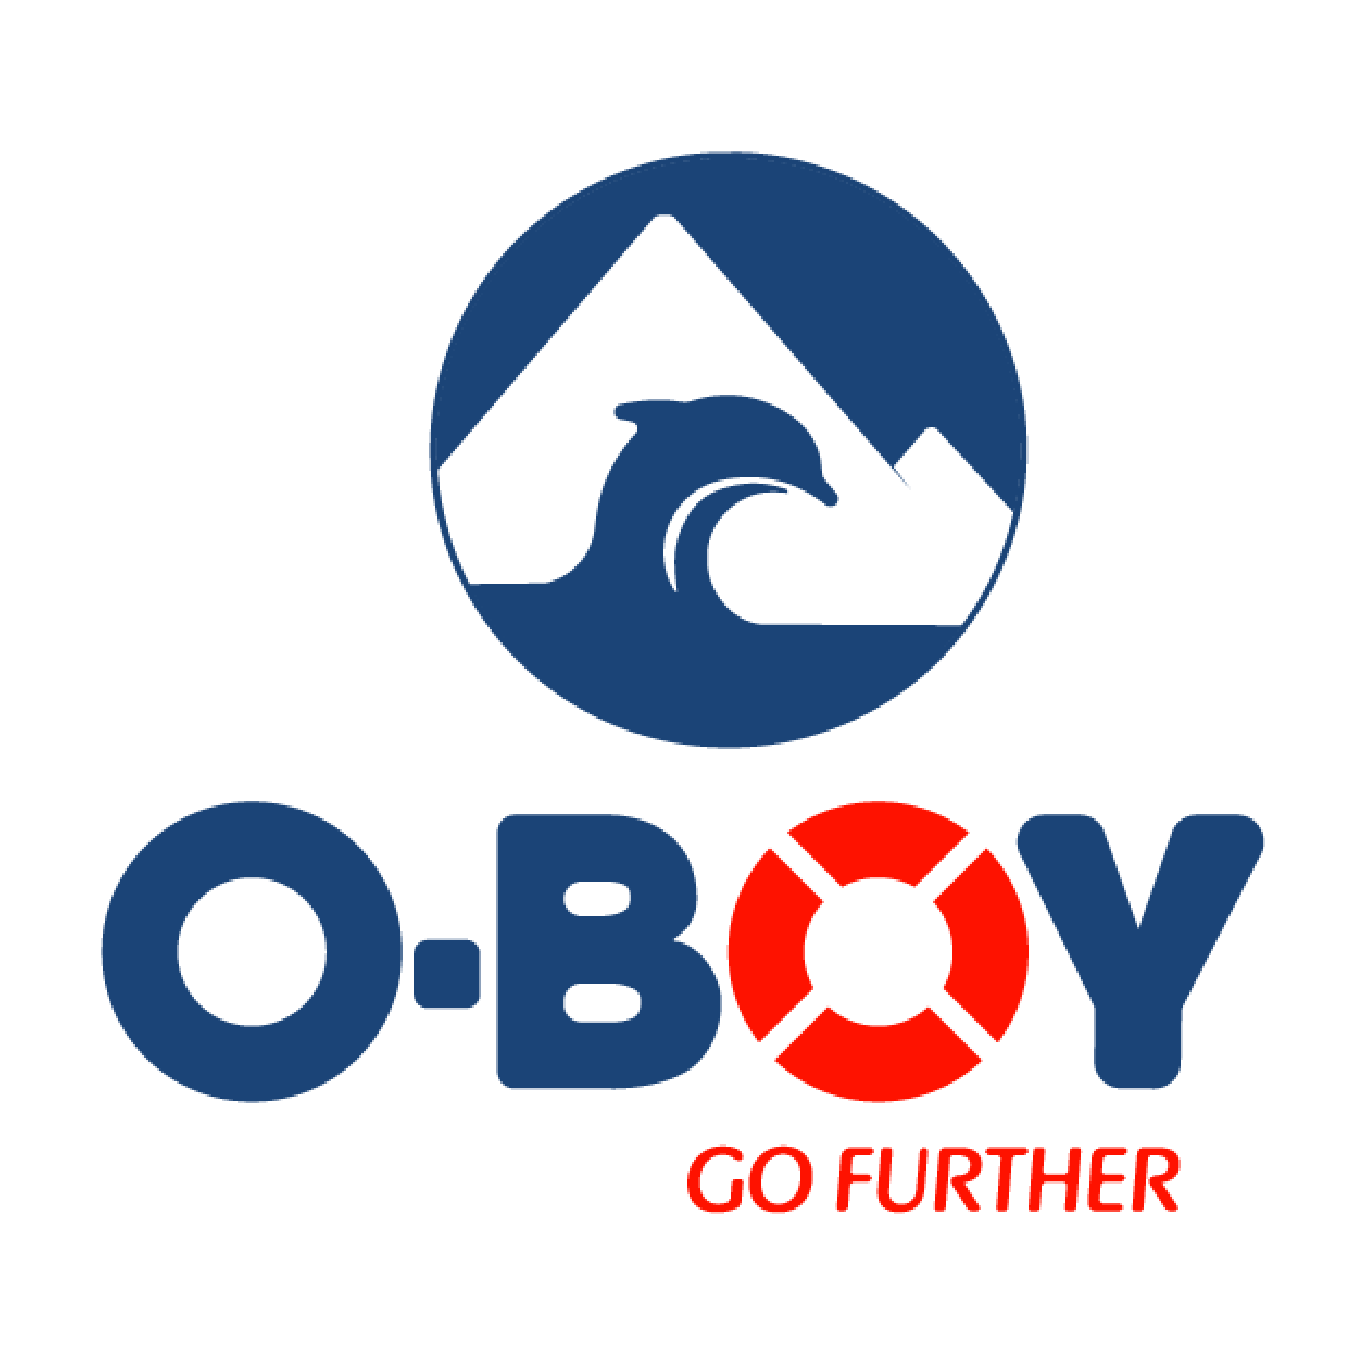 O-boy aims to bridge communication gaps in the most remote locations where traditional cellular networks, like cell phones, often fail.